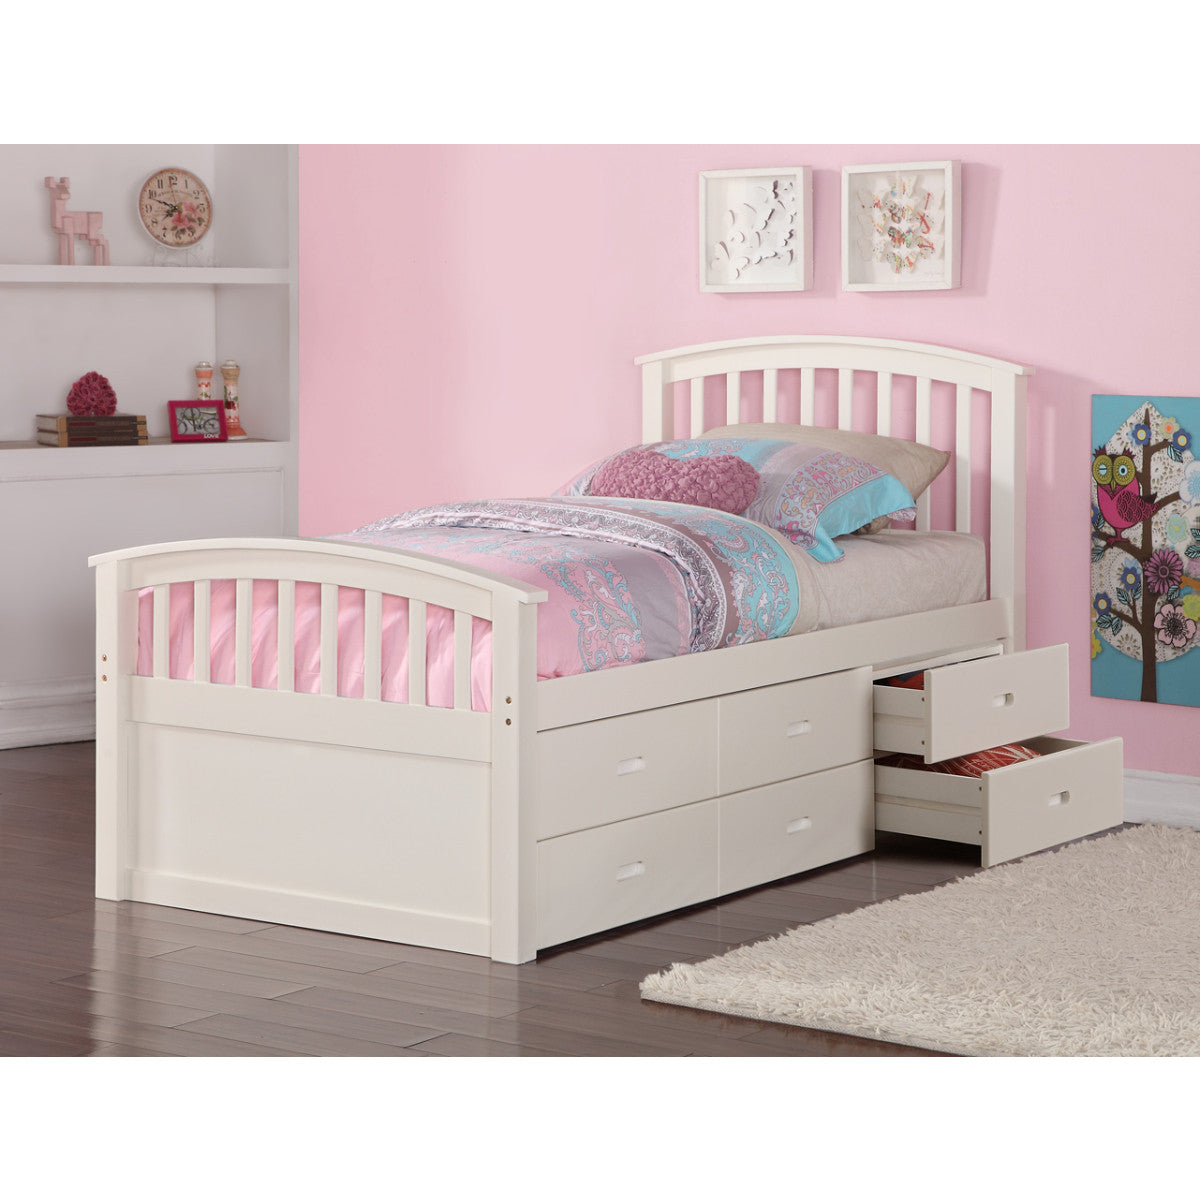 TWIN 6 DRAWERS CAPTAINS BED WHITE